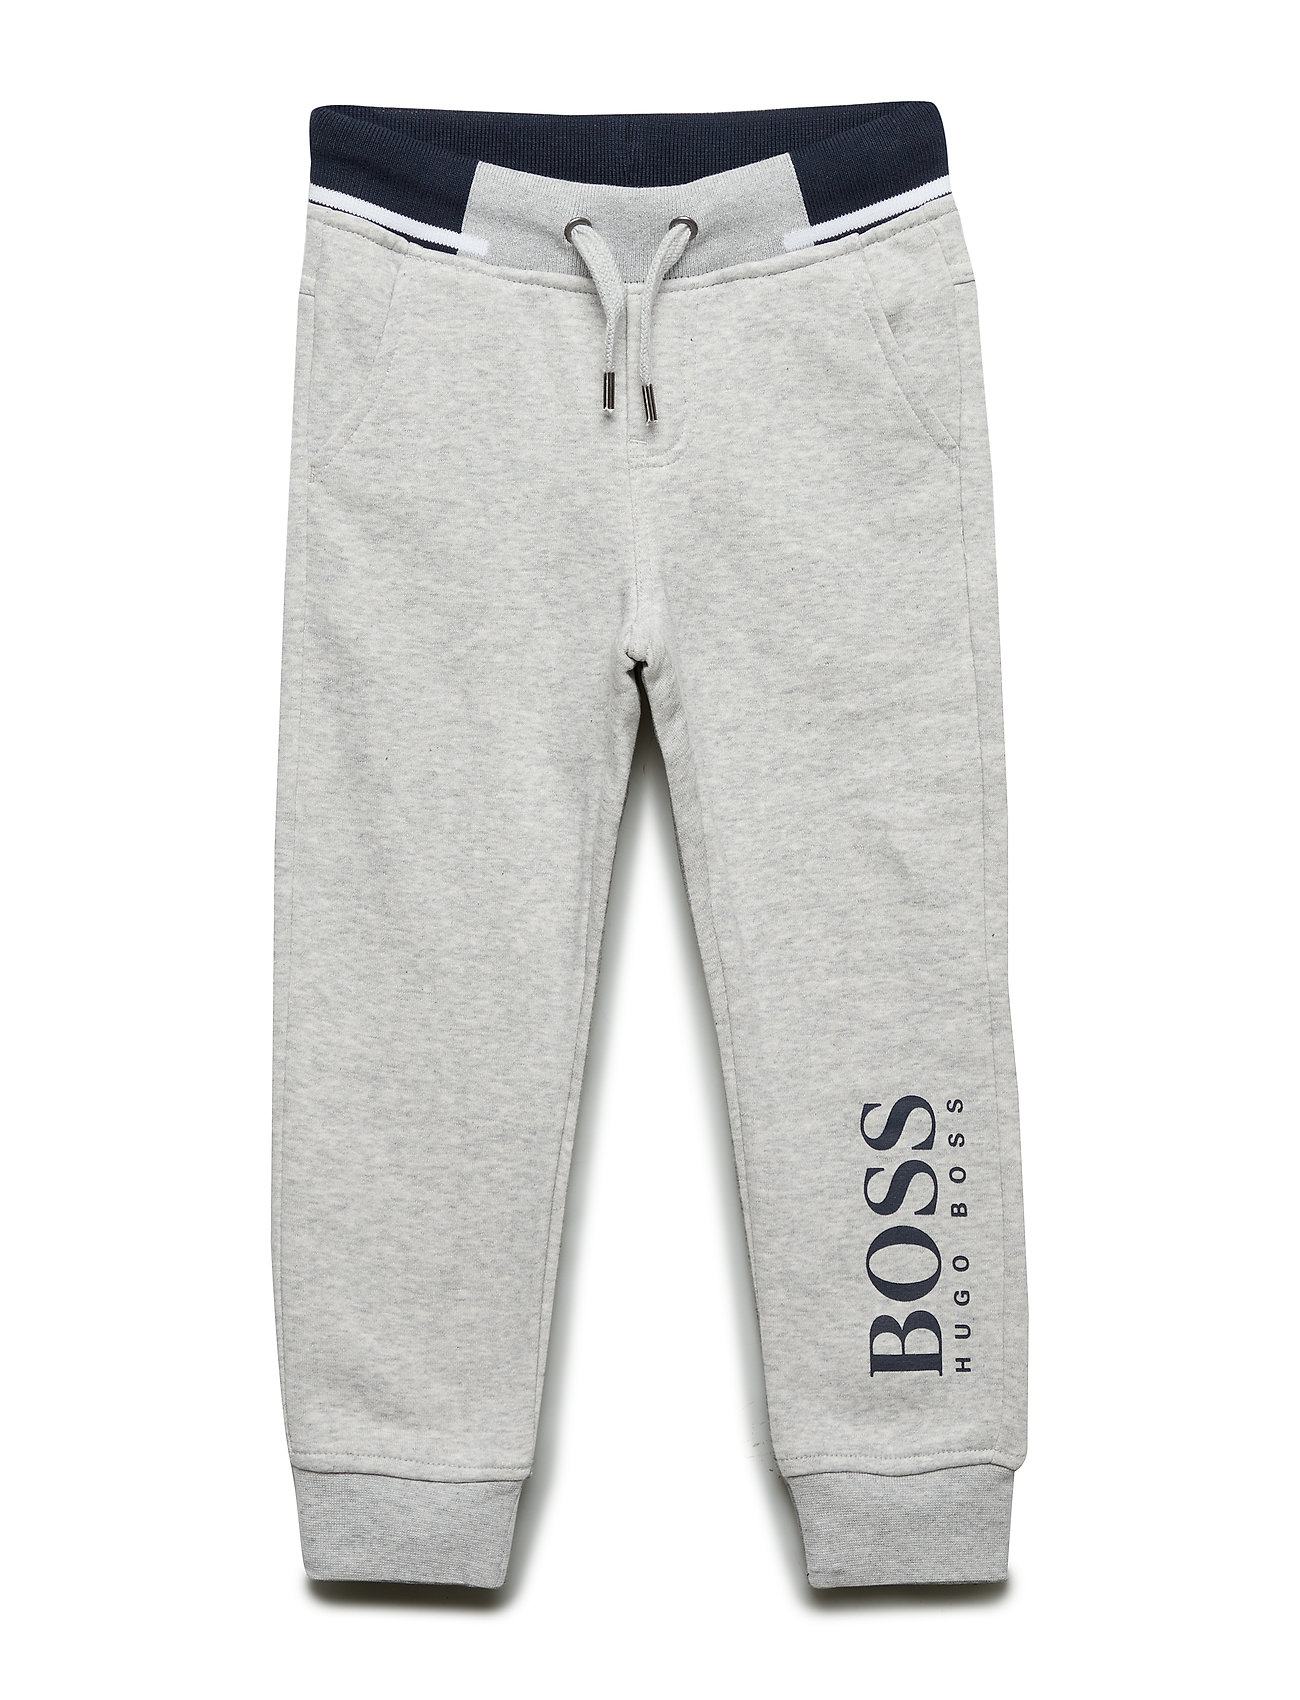 boss tracksuit outlet